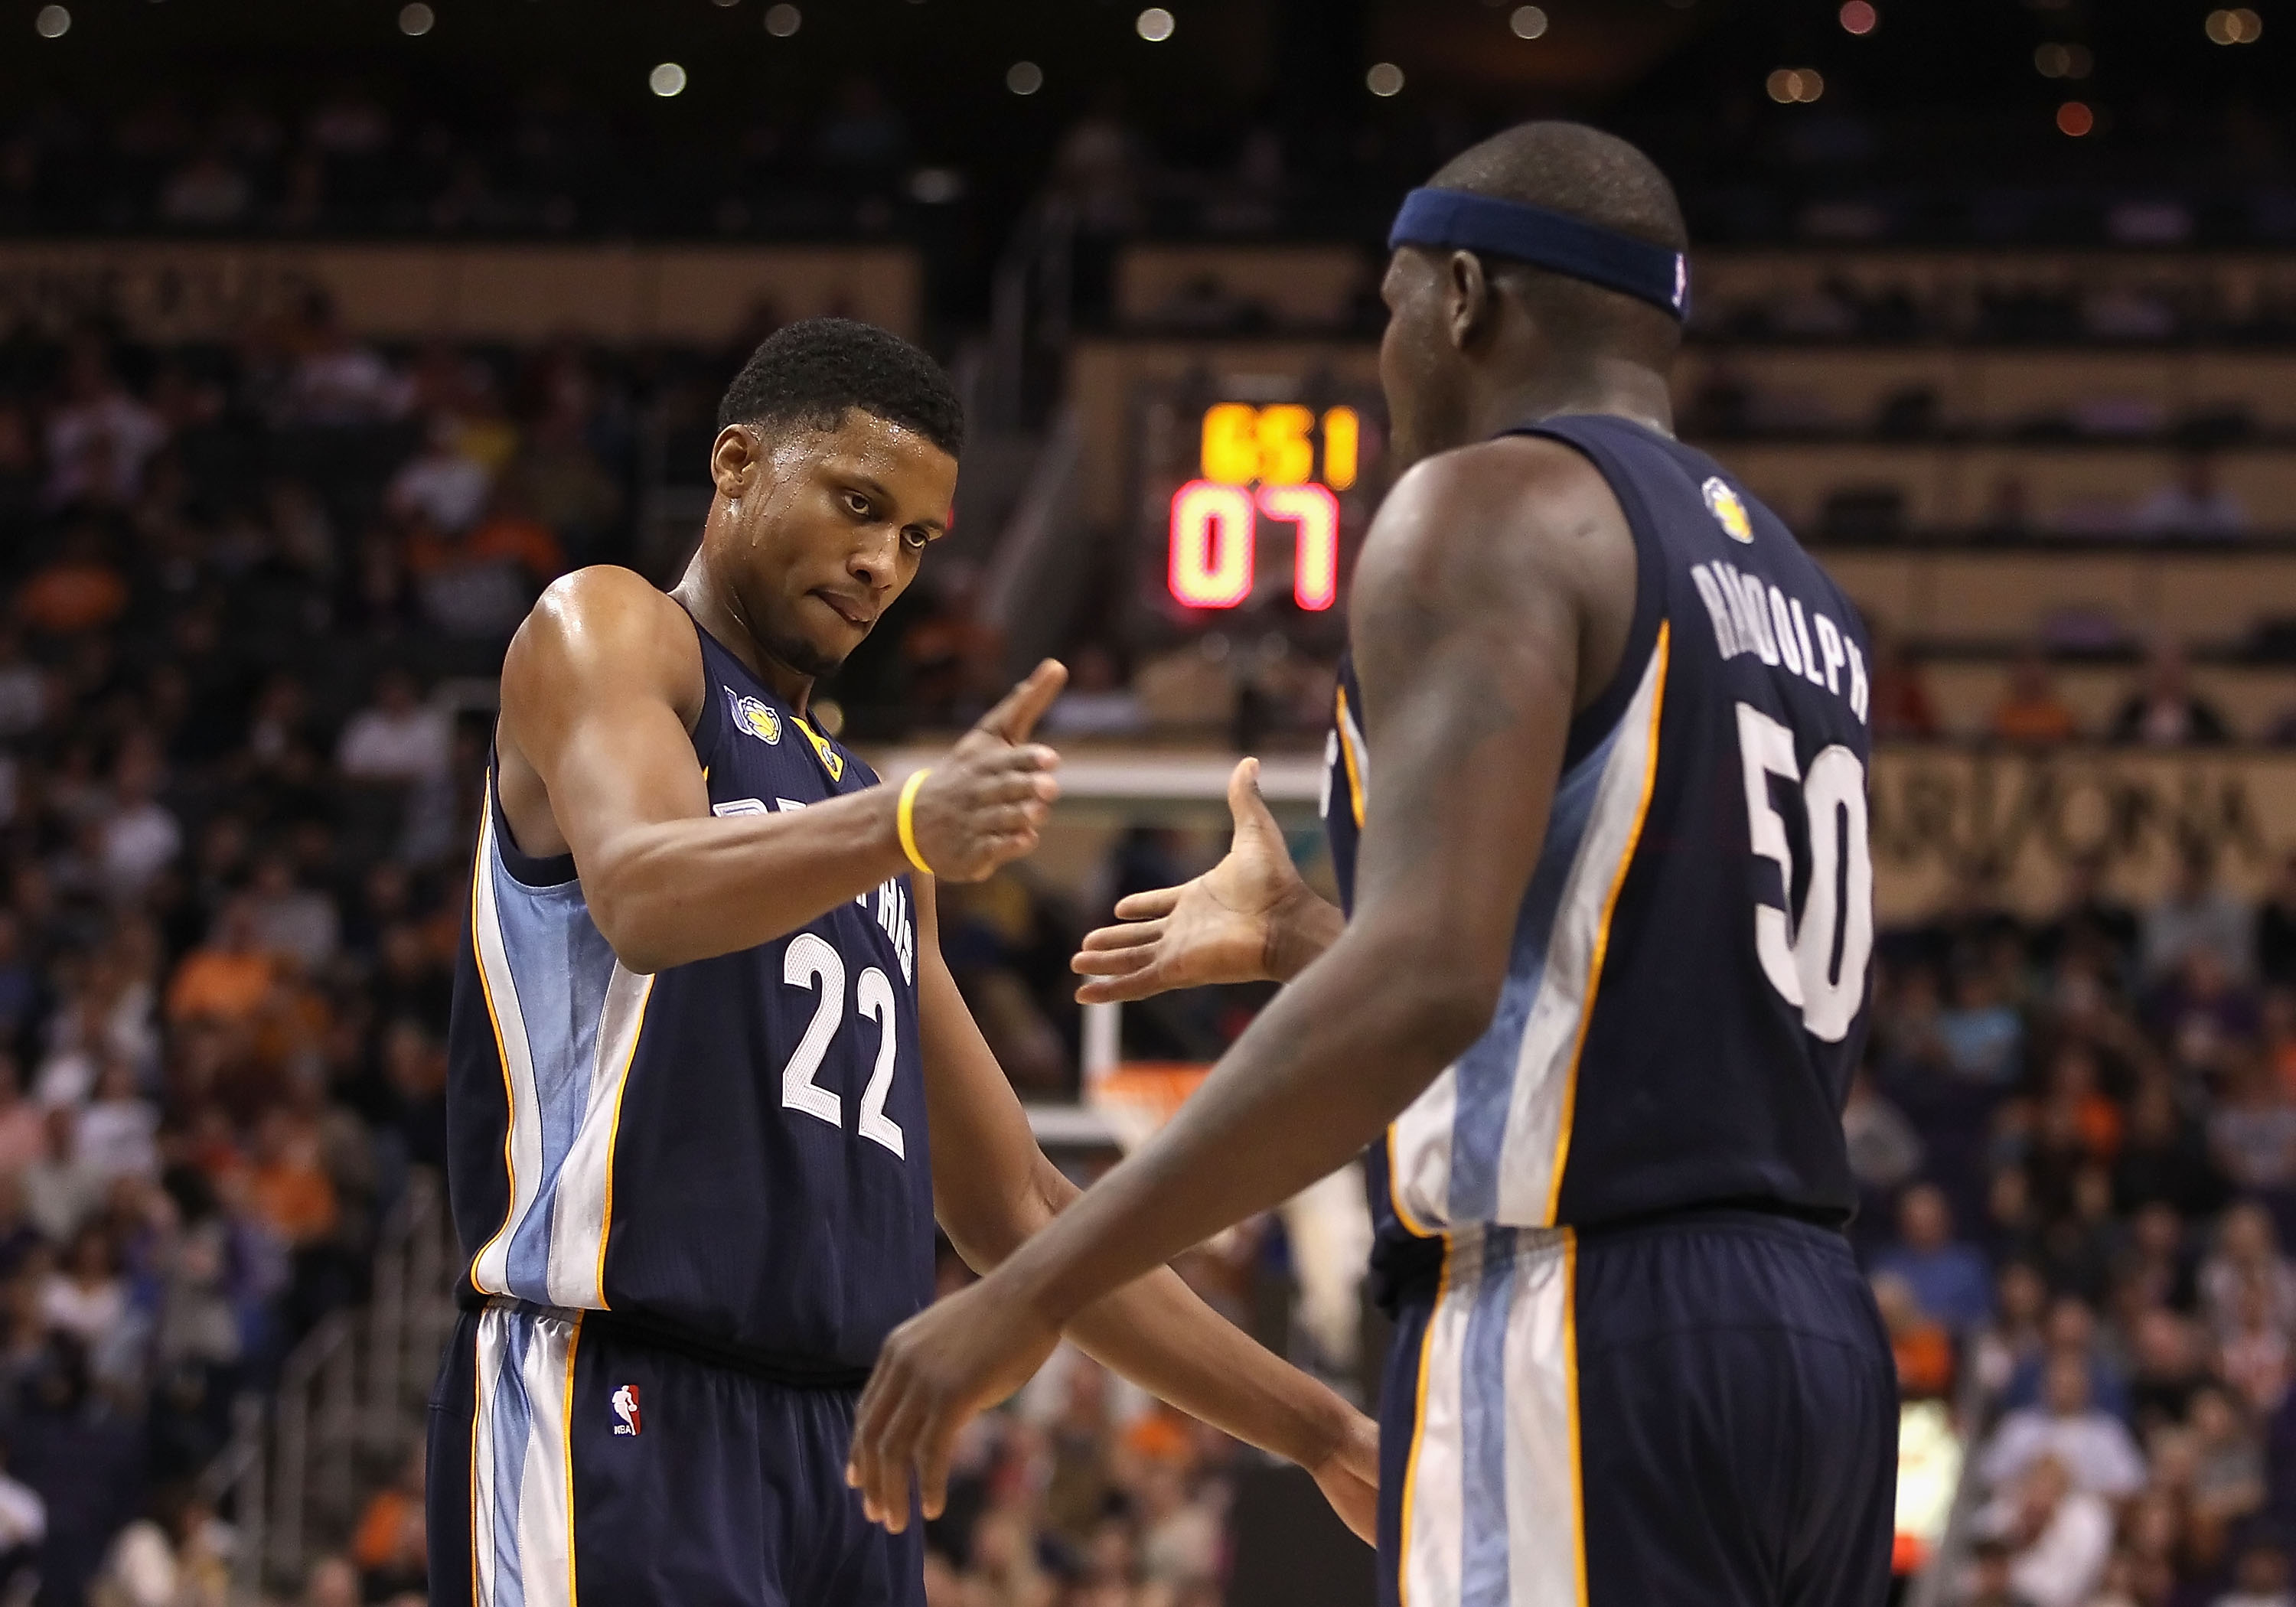 PHOENIX - DECEMBER 08:  Rudy Gay #22 of the Memphis Grizzlies high fives teammate Zach Randolph #50 after scoring against the Phoenix Suns during the NBA game at US Airways Center on December 8, 2010 in Phoenix, Arizona. The Grizzlies defeated the Suns 10